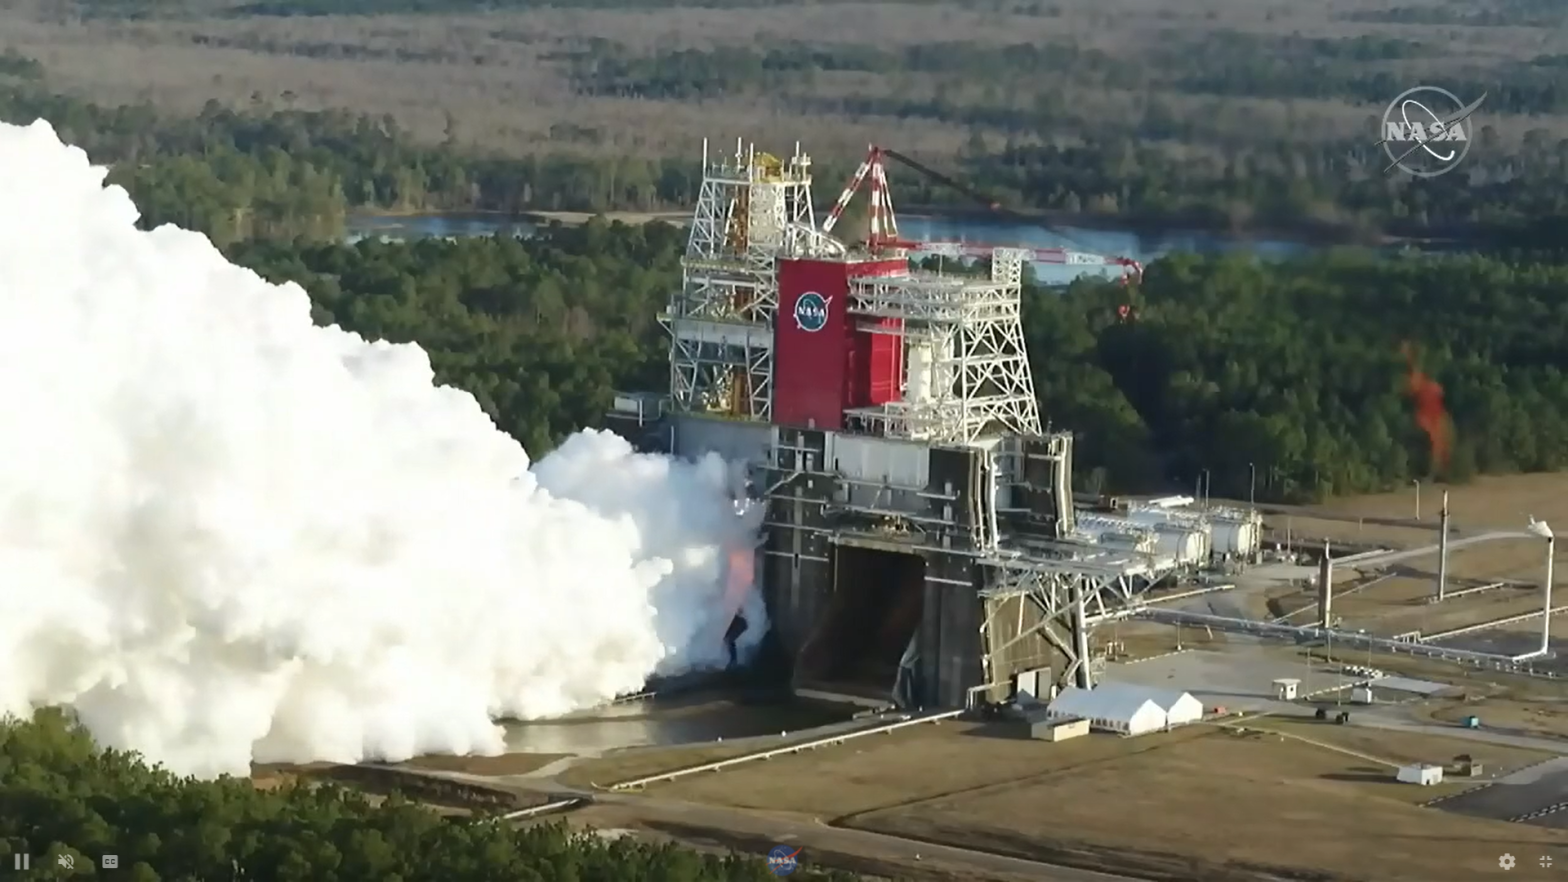 The hotfire test of the core stage, conducted on January 16 at NASA's Stennis Space Centre in Mississippi. (Image: NASA Television)